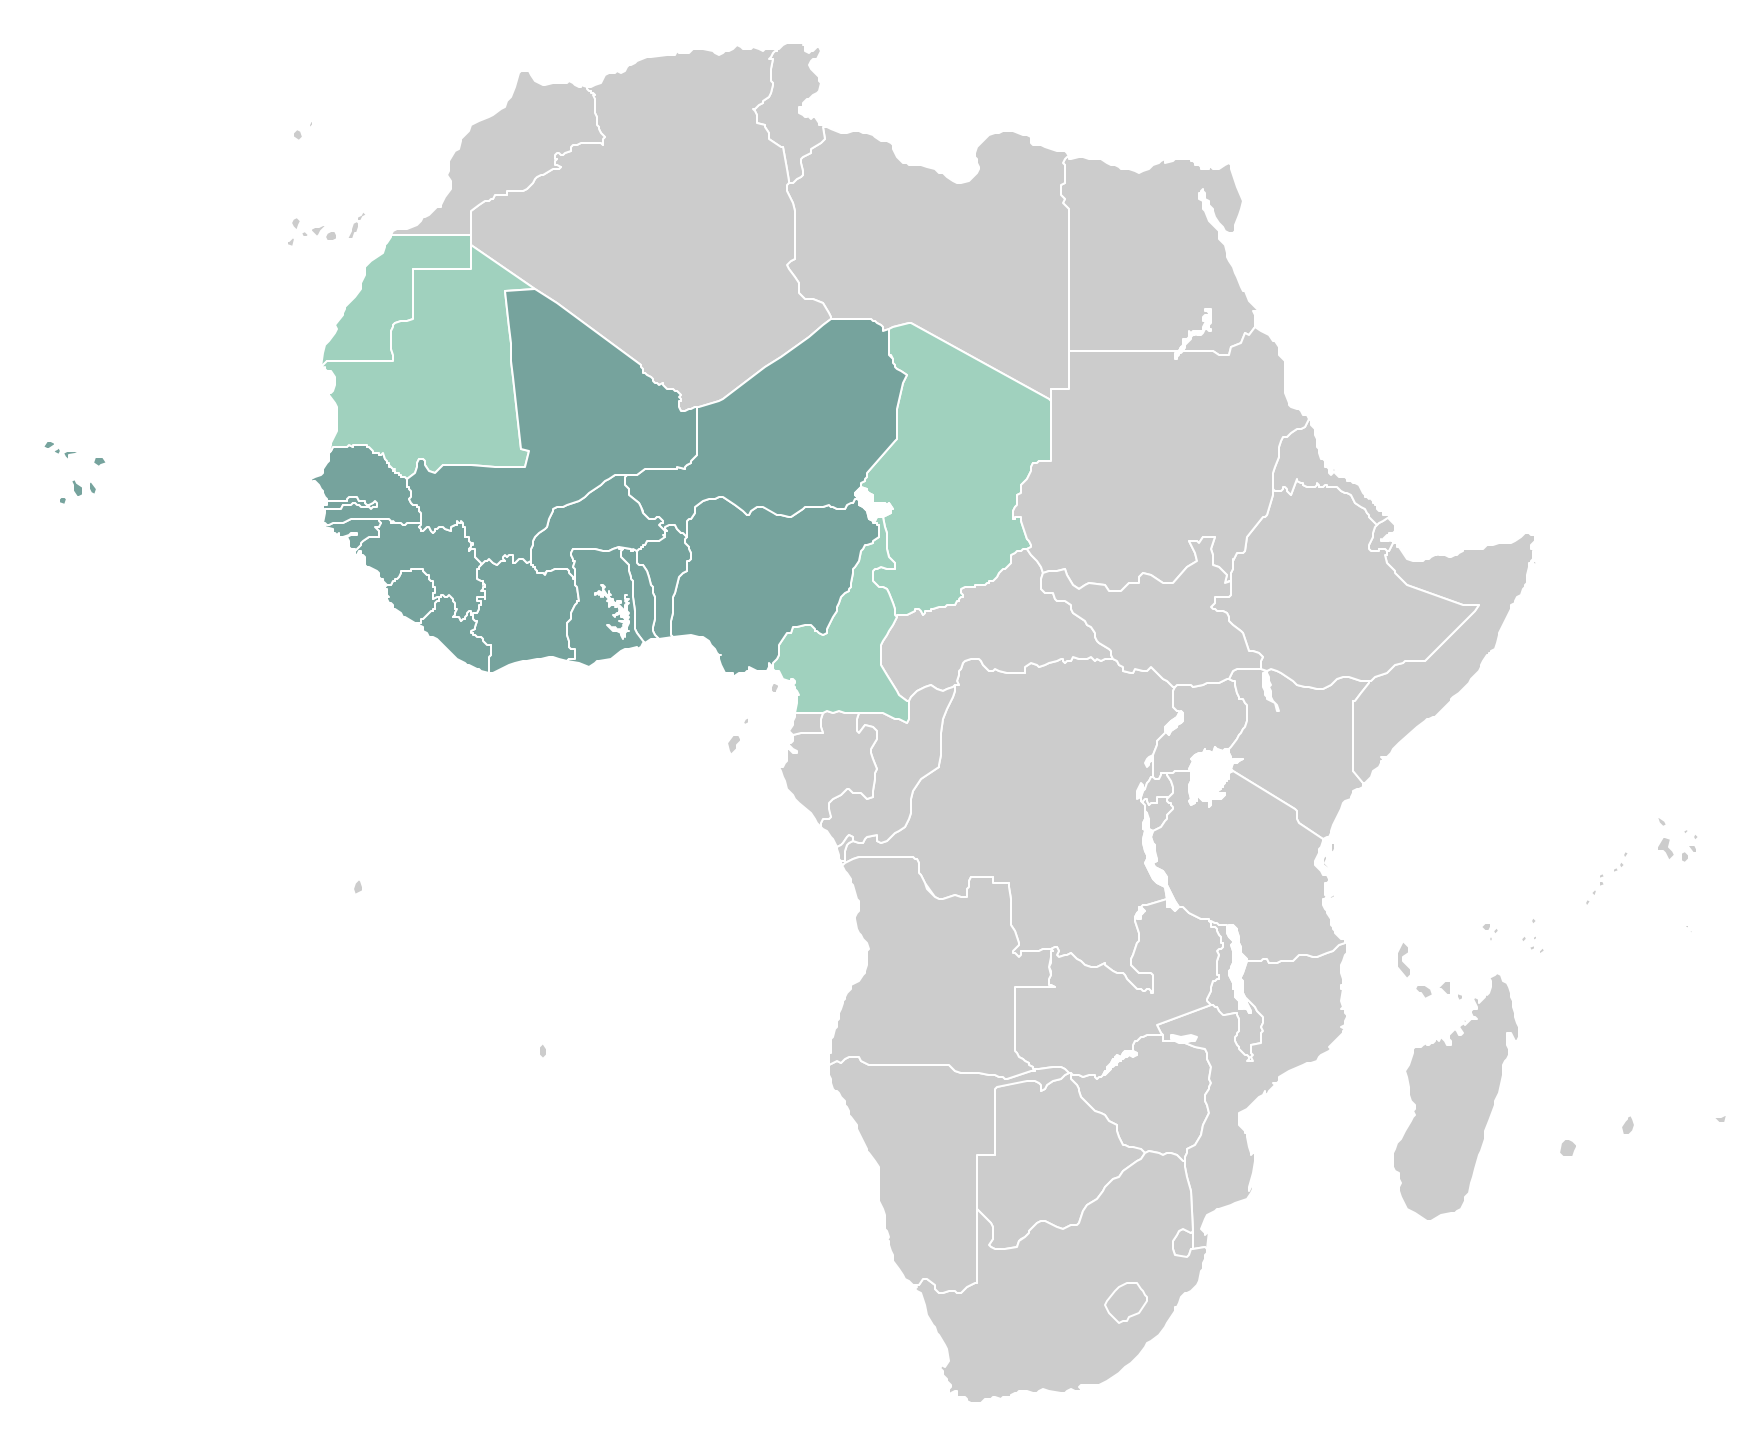 West Africa countries